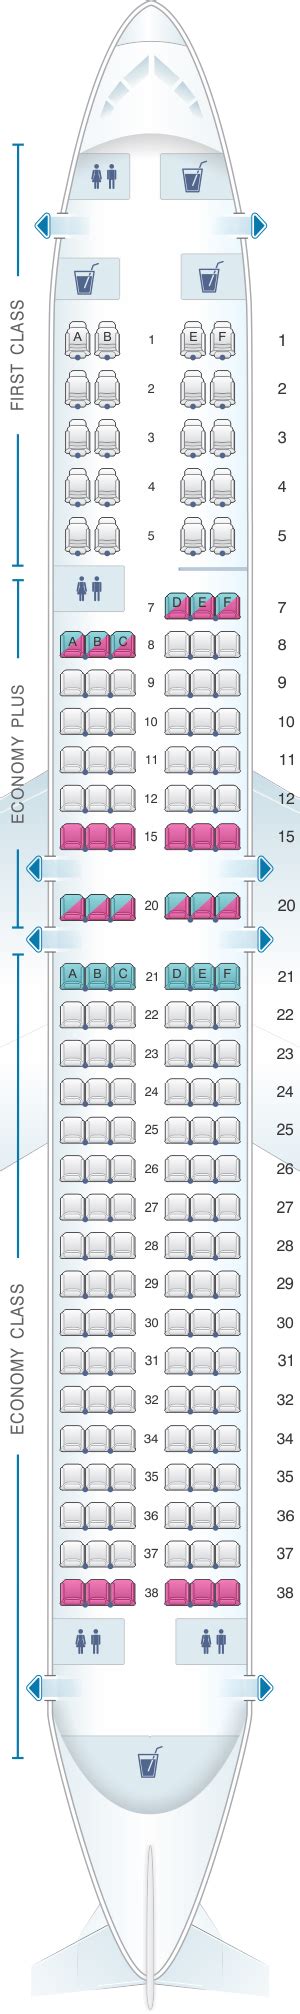 boeing 737 900 united seat map